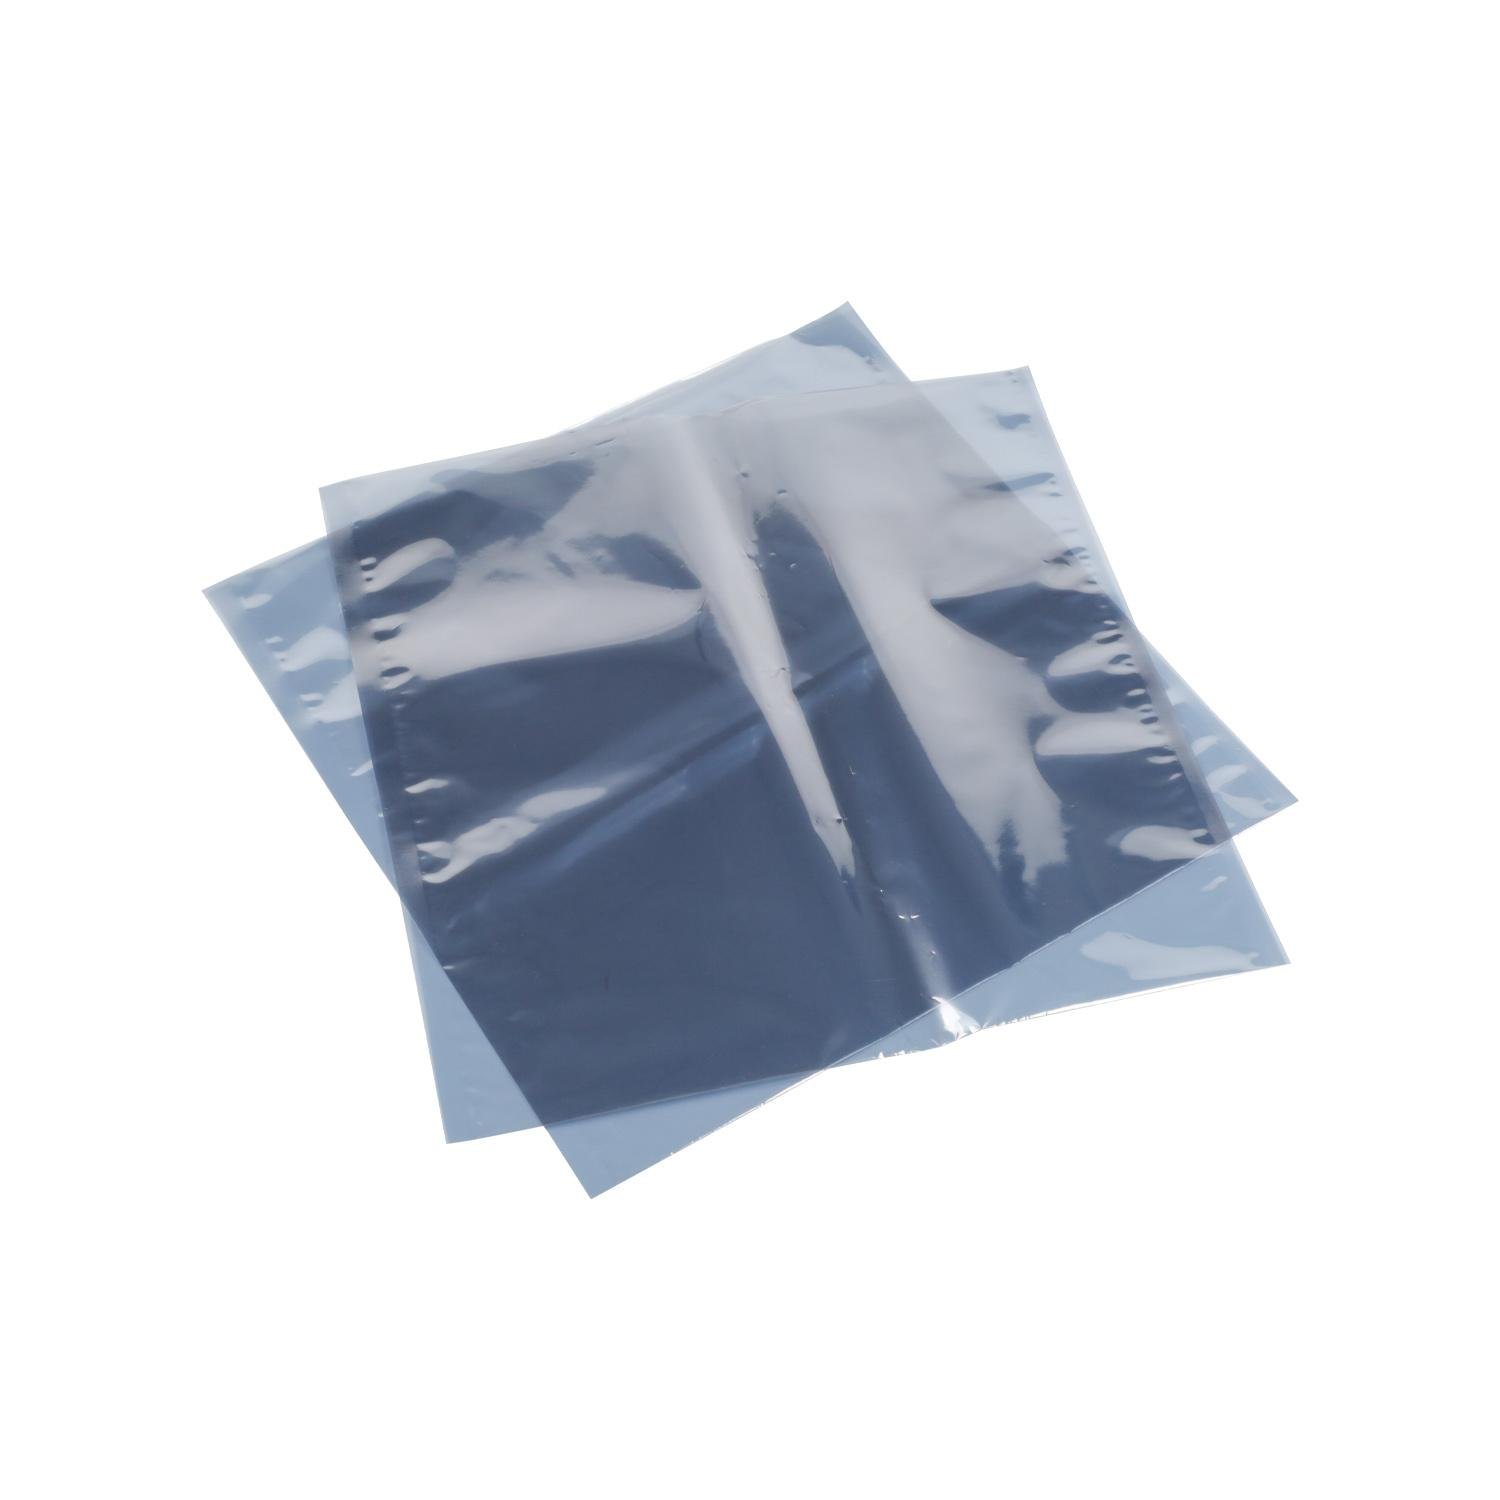 Static shielding bags with zipper for packaging electronic parts